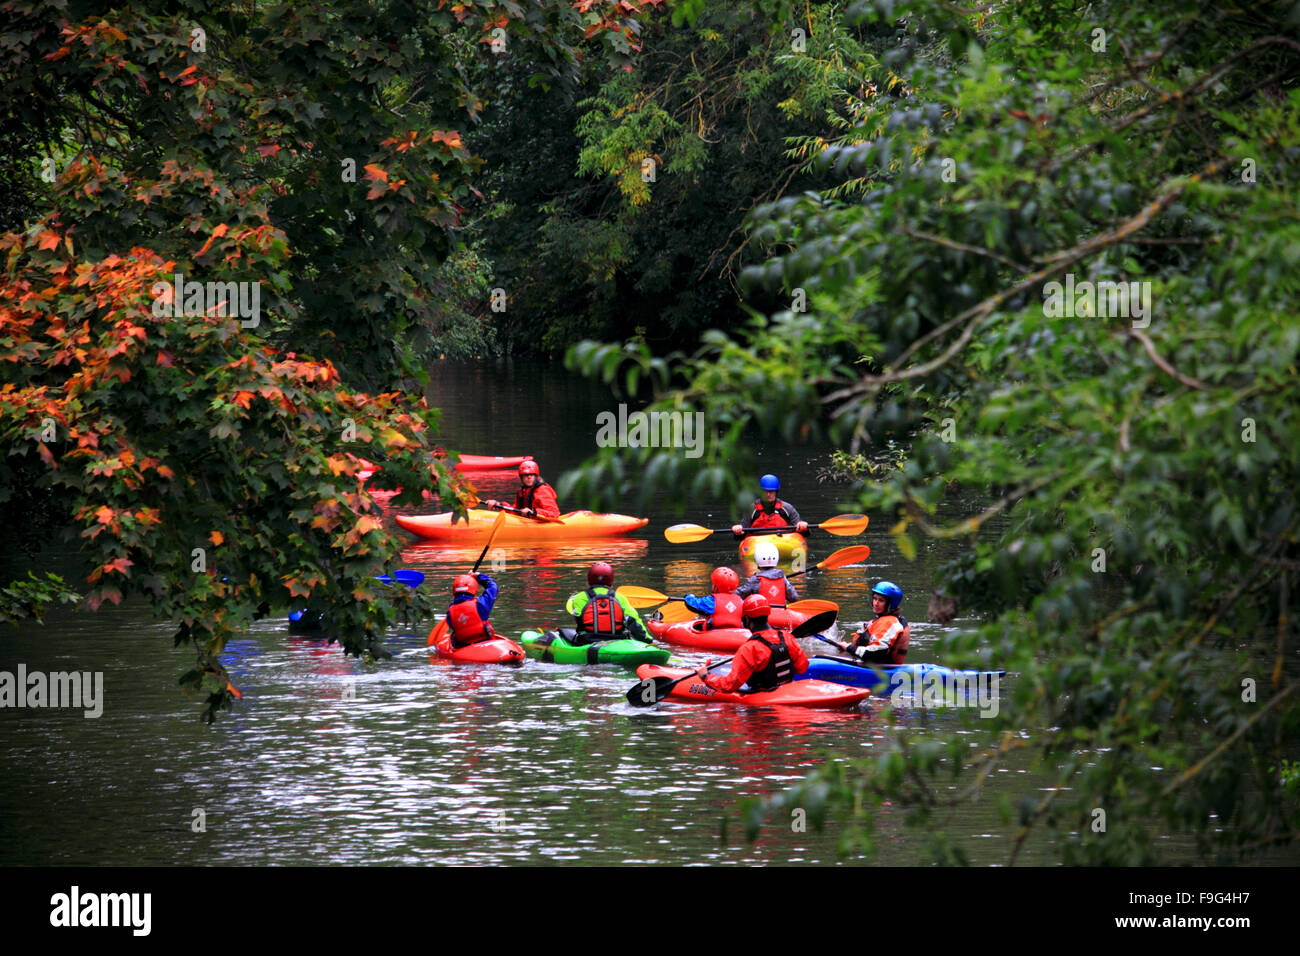 Canoeists wearing red lifejackets and helmets on the River Leam, Leamington Spa, Warwickshire. Stock Photo